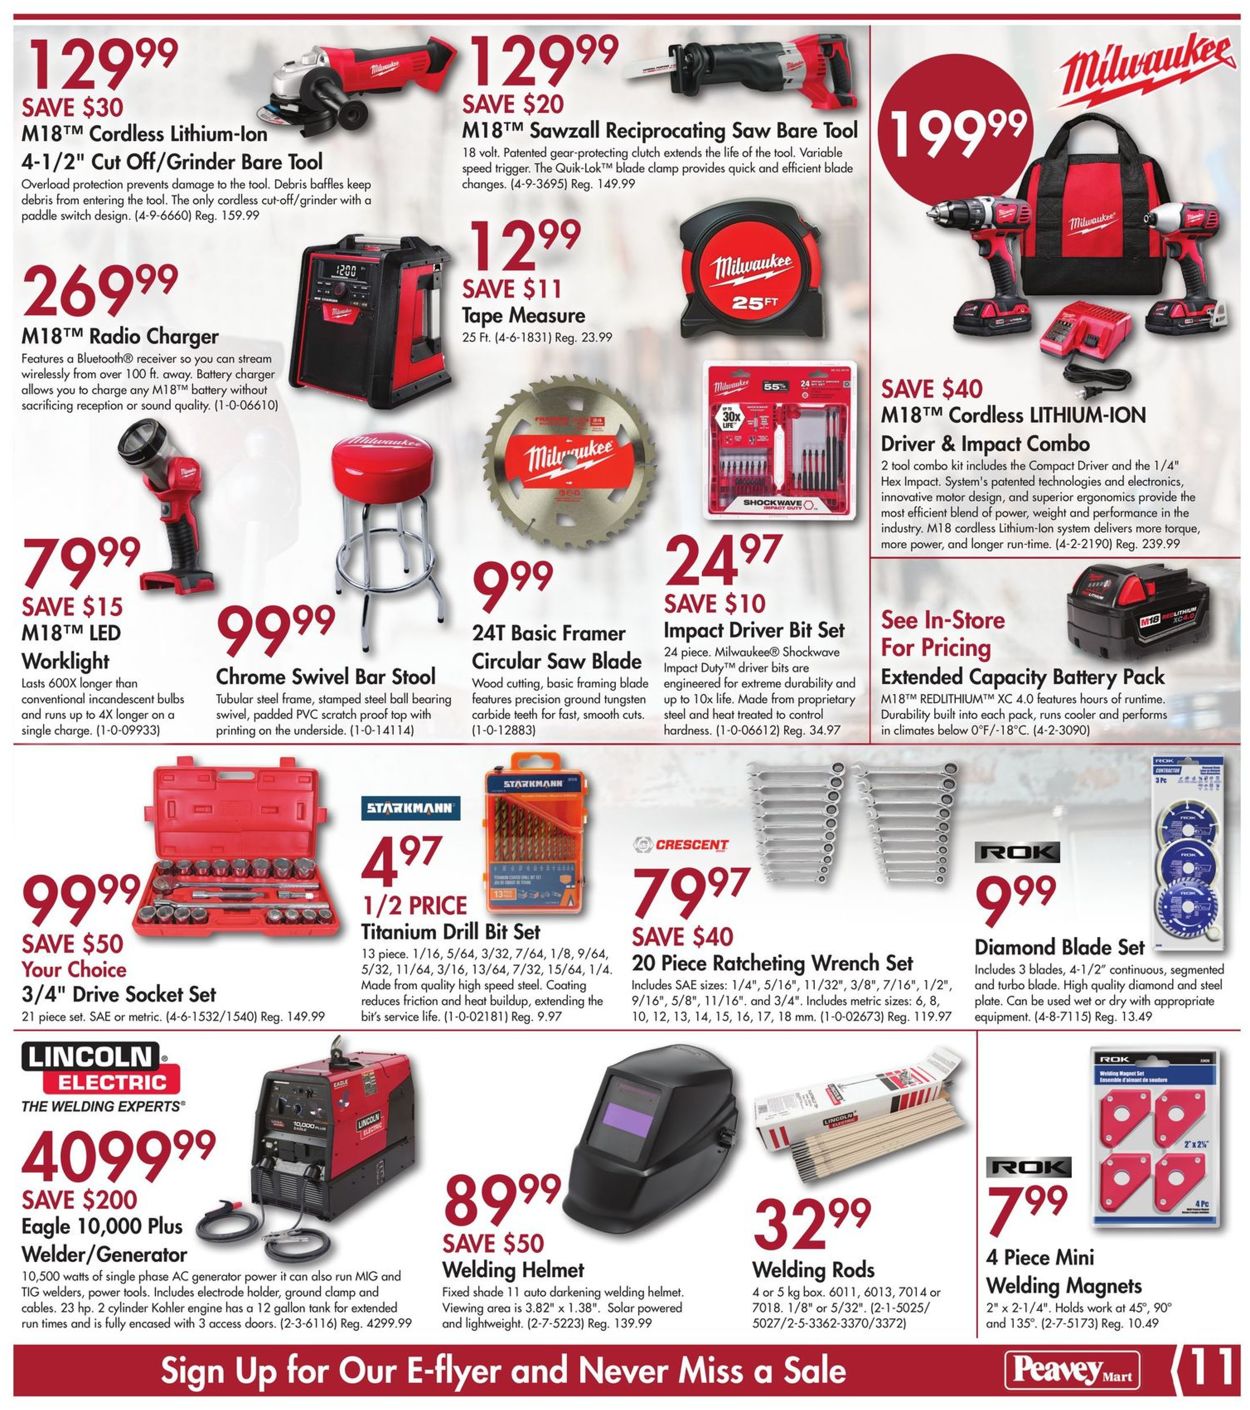 Peavey Mart Flyer from 06/28/2019